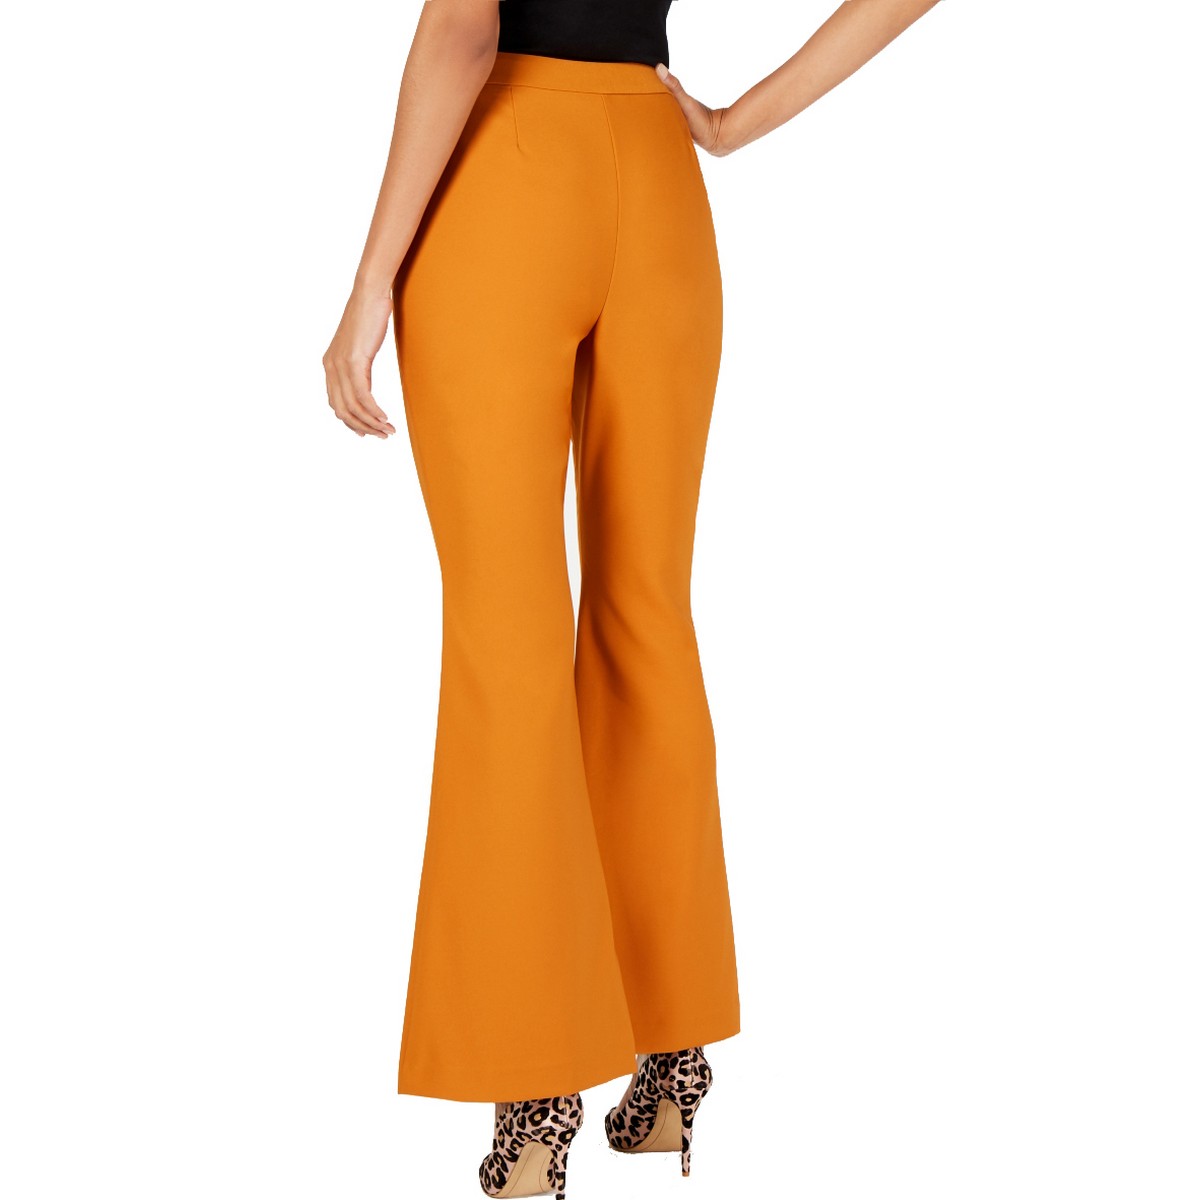 Inc Womens Yellow Wide Leg Mid Rise Pull on Pants 16 BHFO 3777 for sale ...